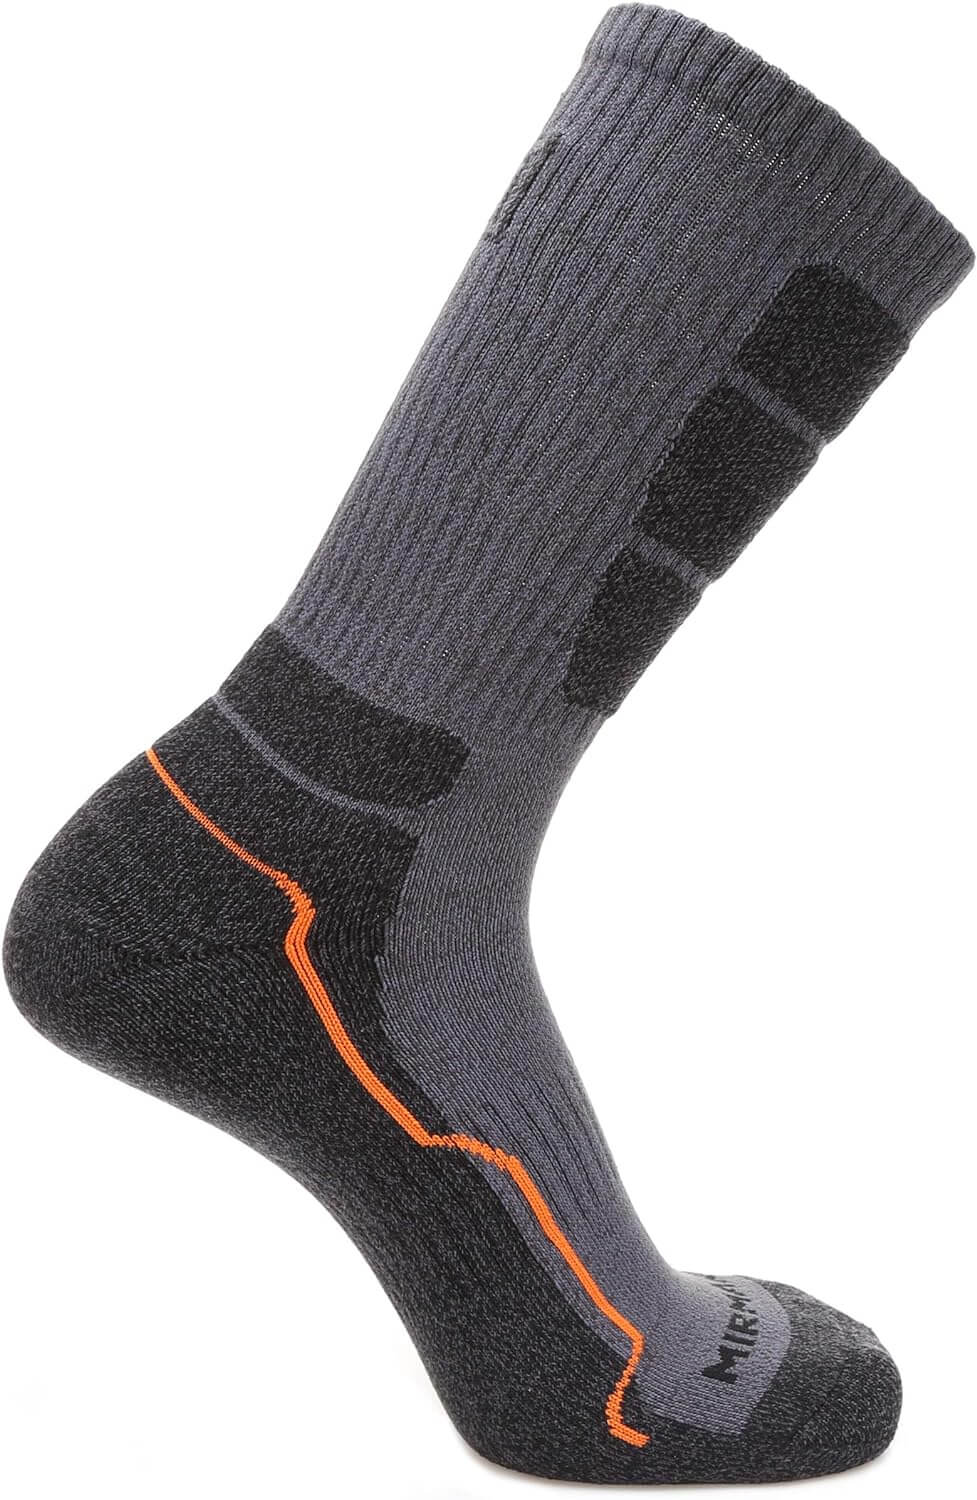 Shop The Latest >Men's 5 Pairs Hiking Outdoor Trekking Crew Socks > *Only $40.49*> From The Top Brand > *MIRMARUl* > Shop Now and Get Free Shipping On Orders Over $45.00 >*Shop Earth Foot*